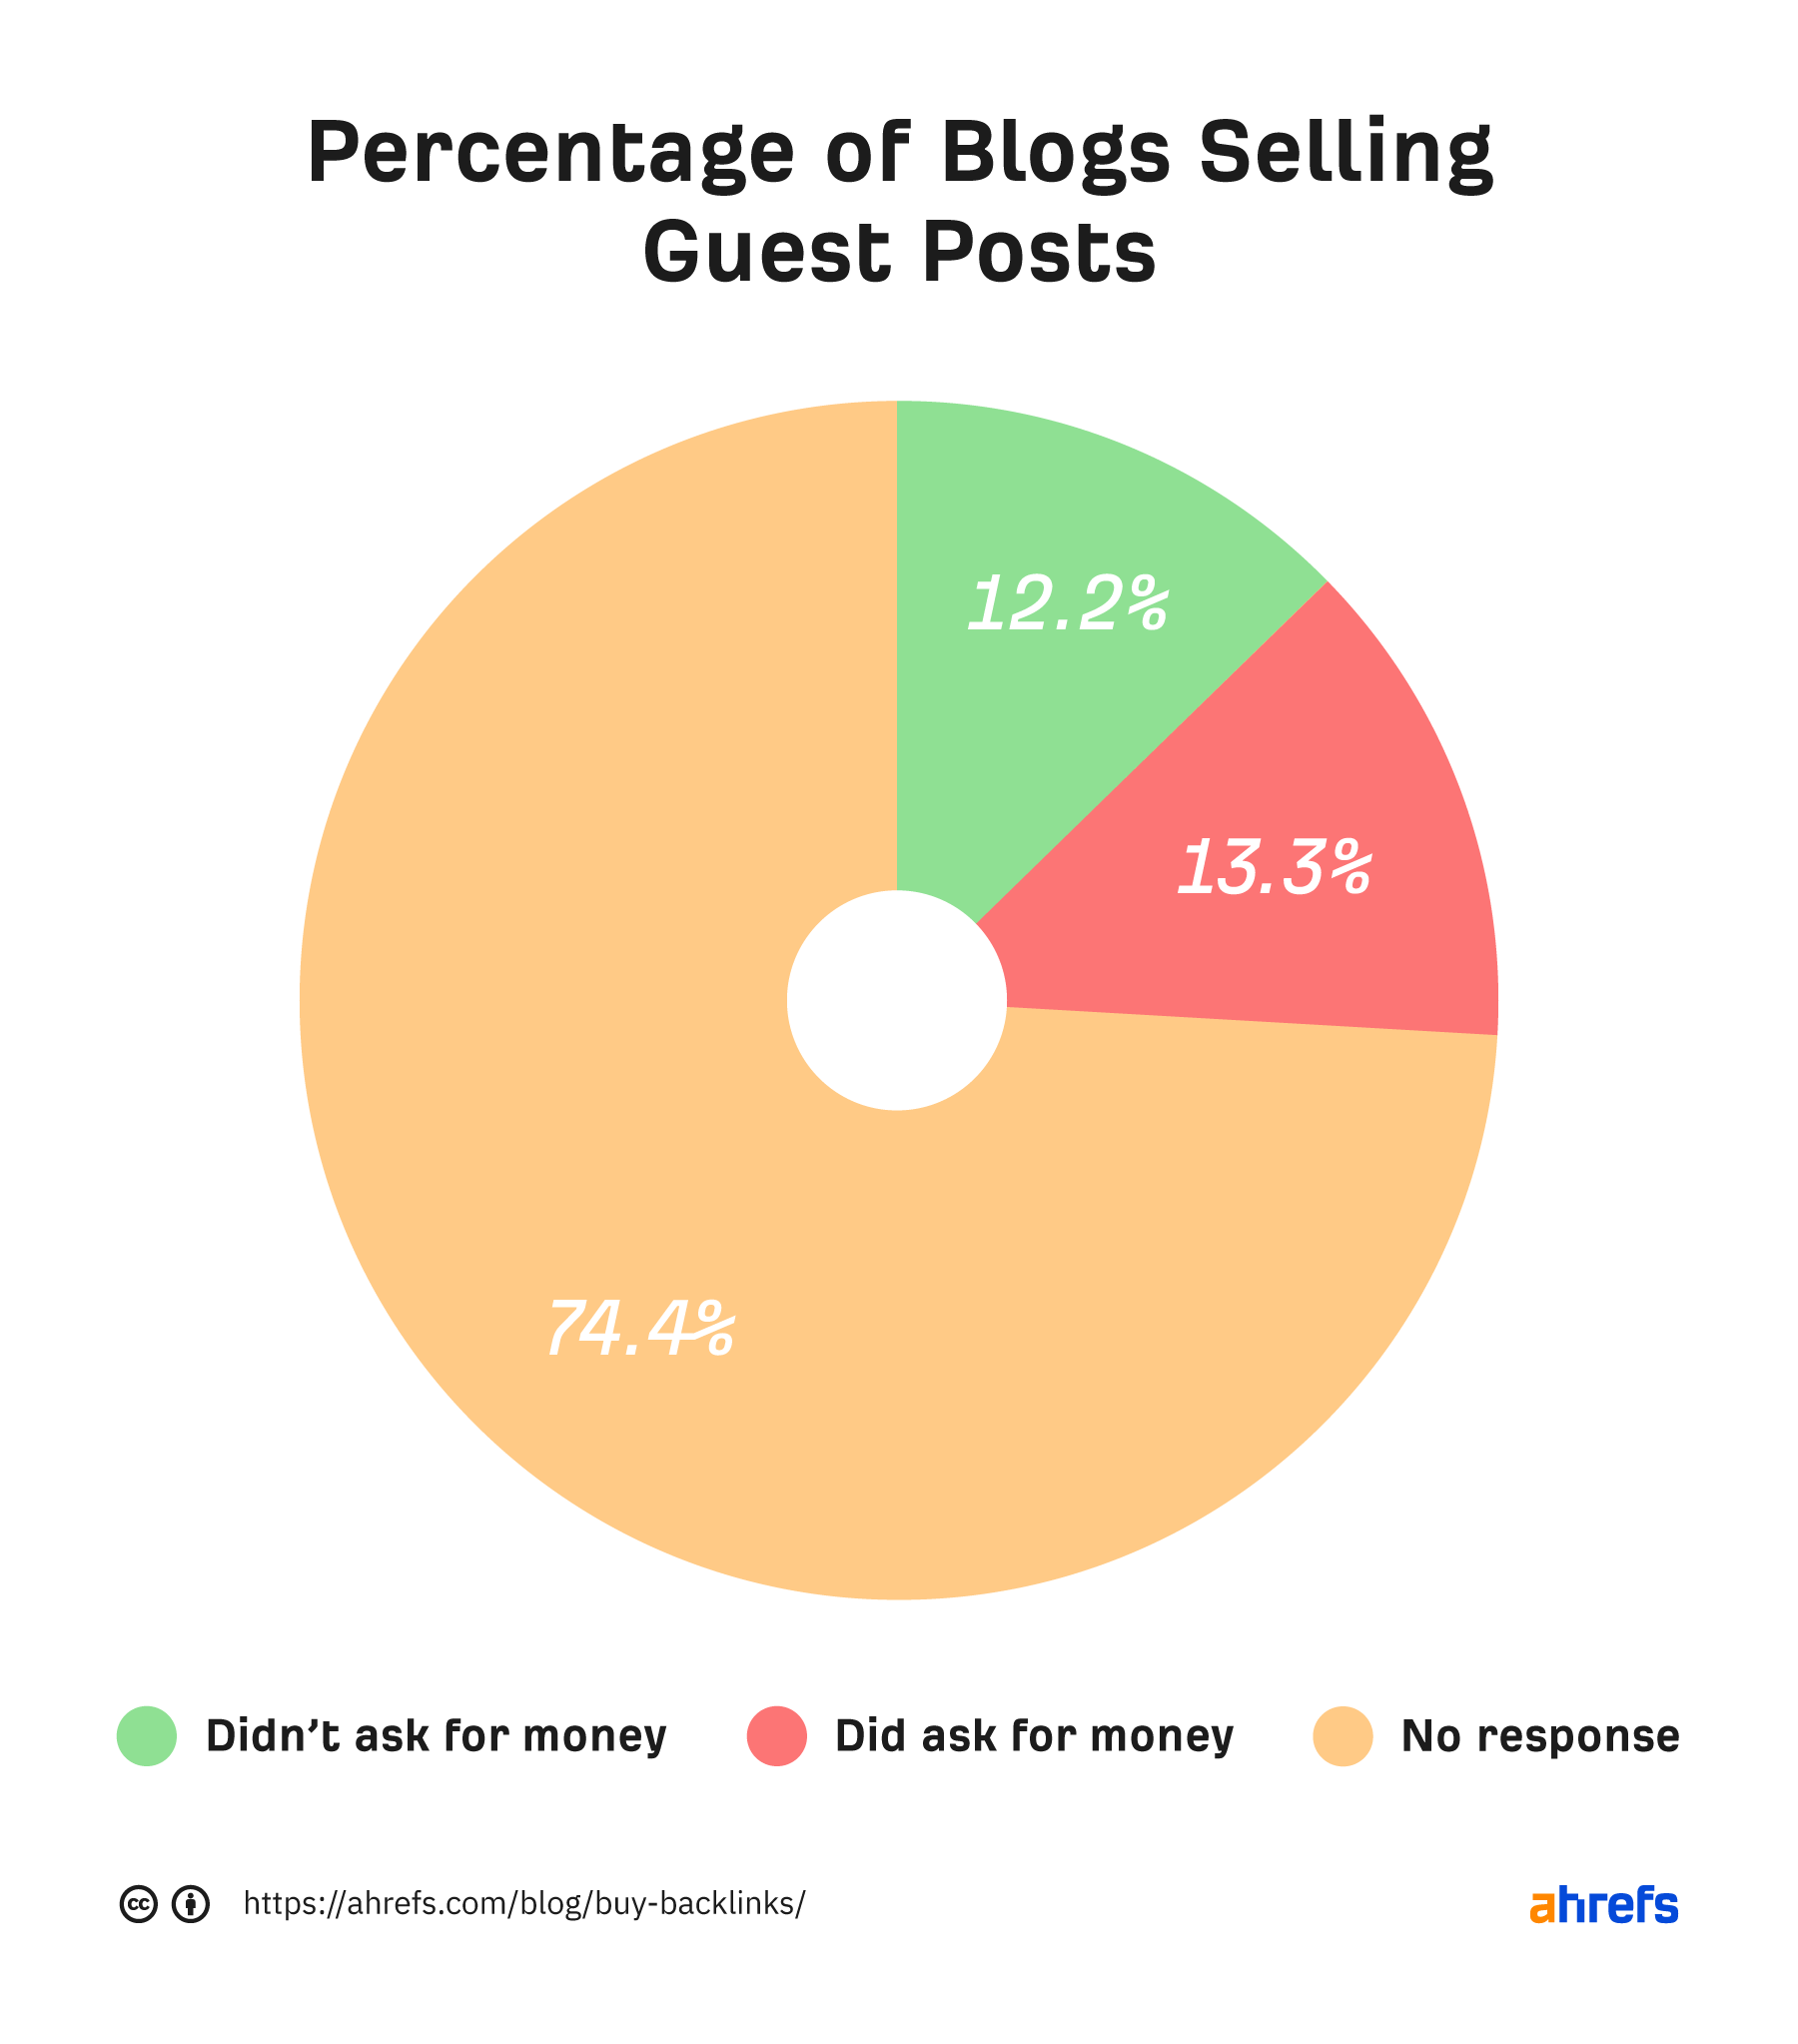 Percentage of blogs selling guest posts
